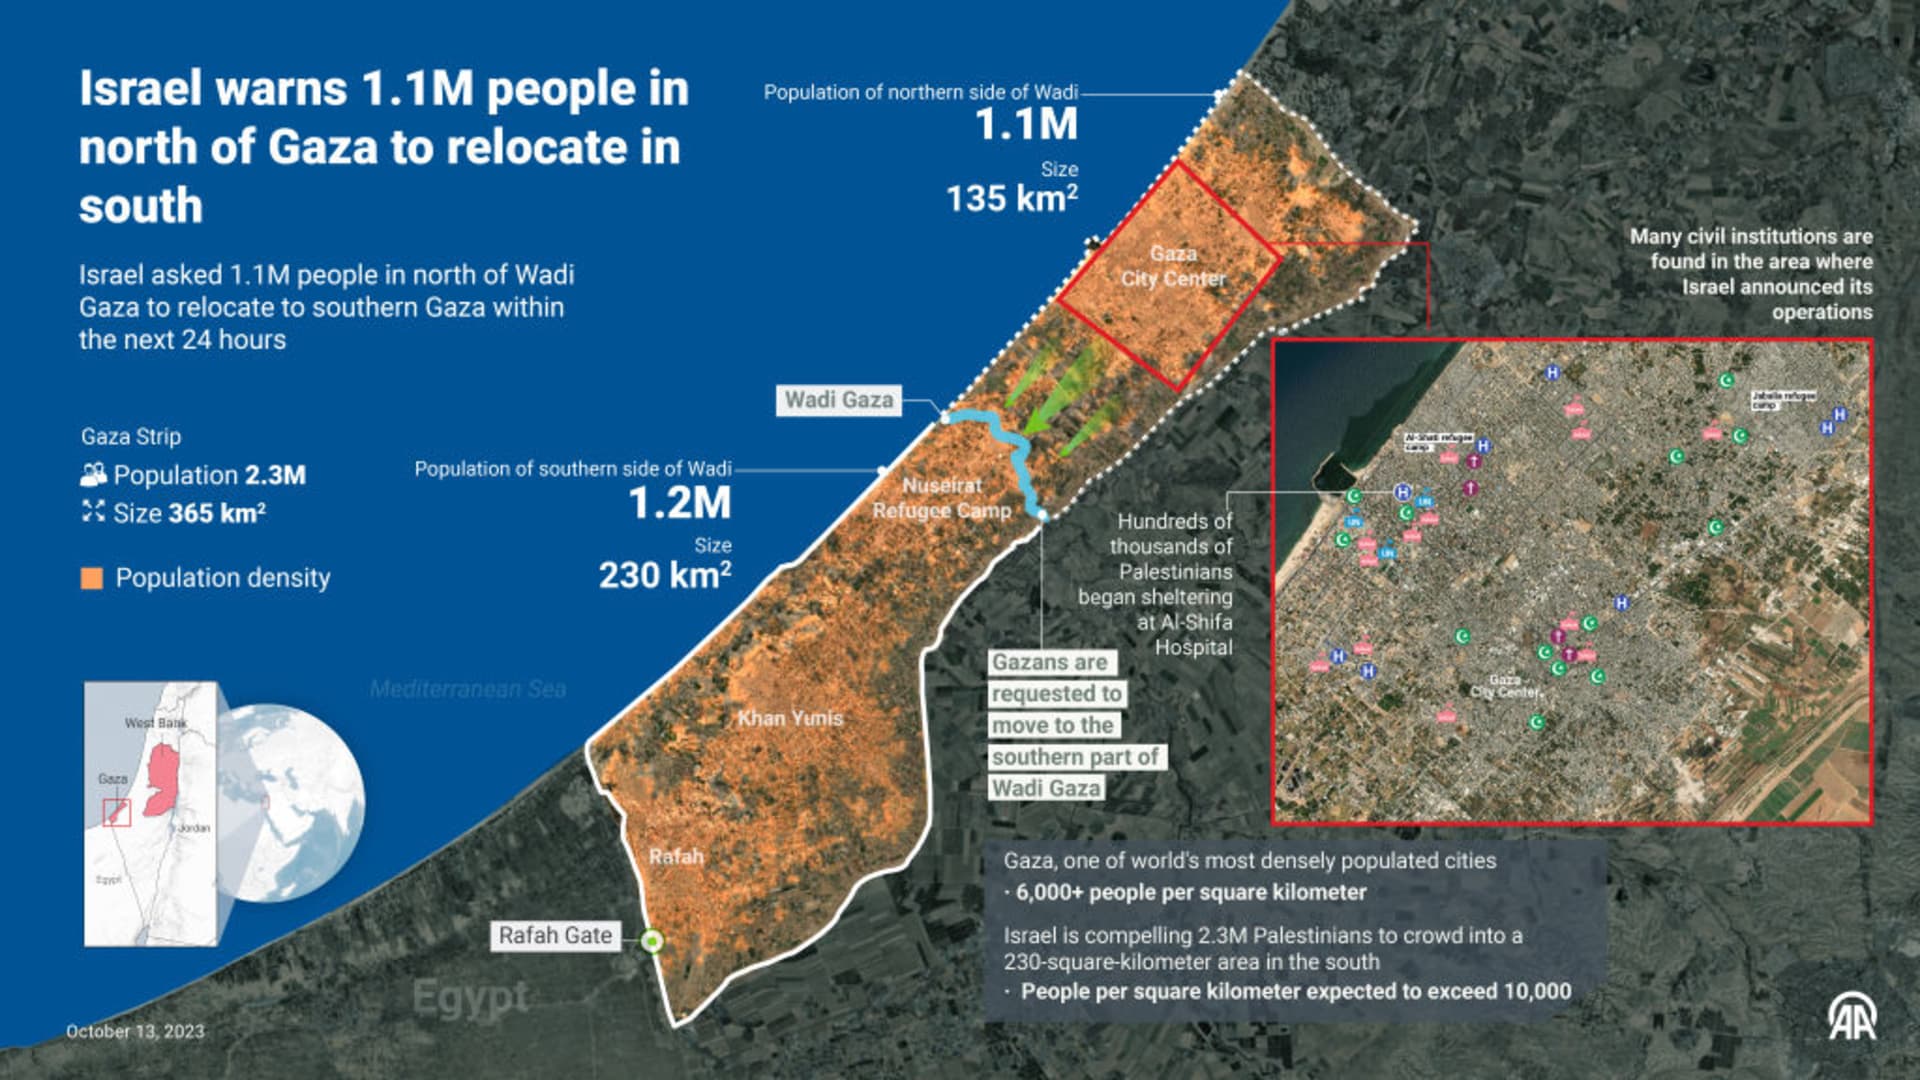 Israel warns 1.1M people in north of Gaza to relocate to the south.